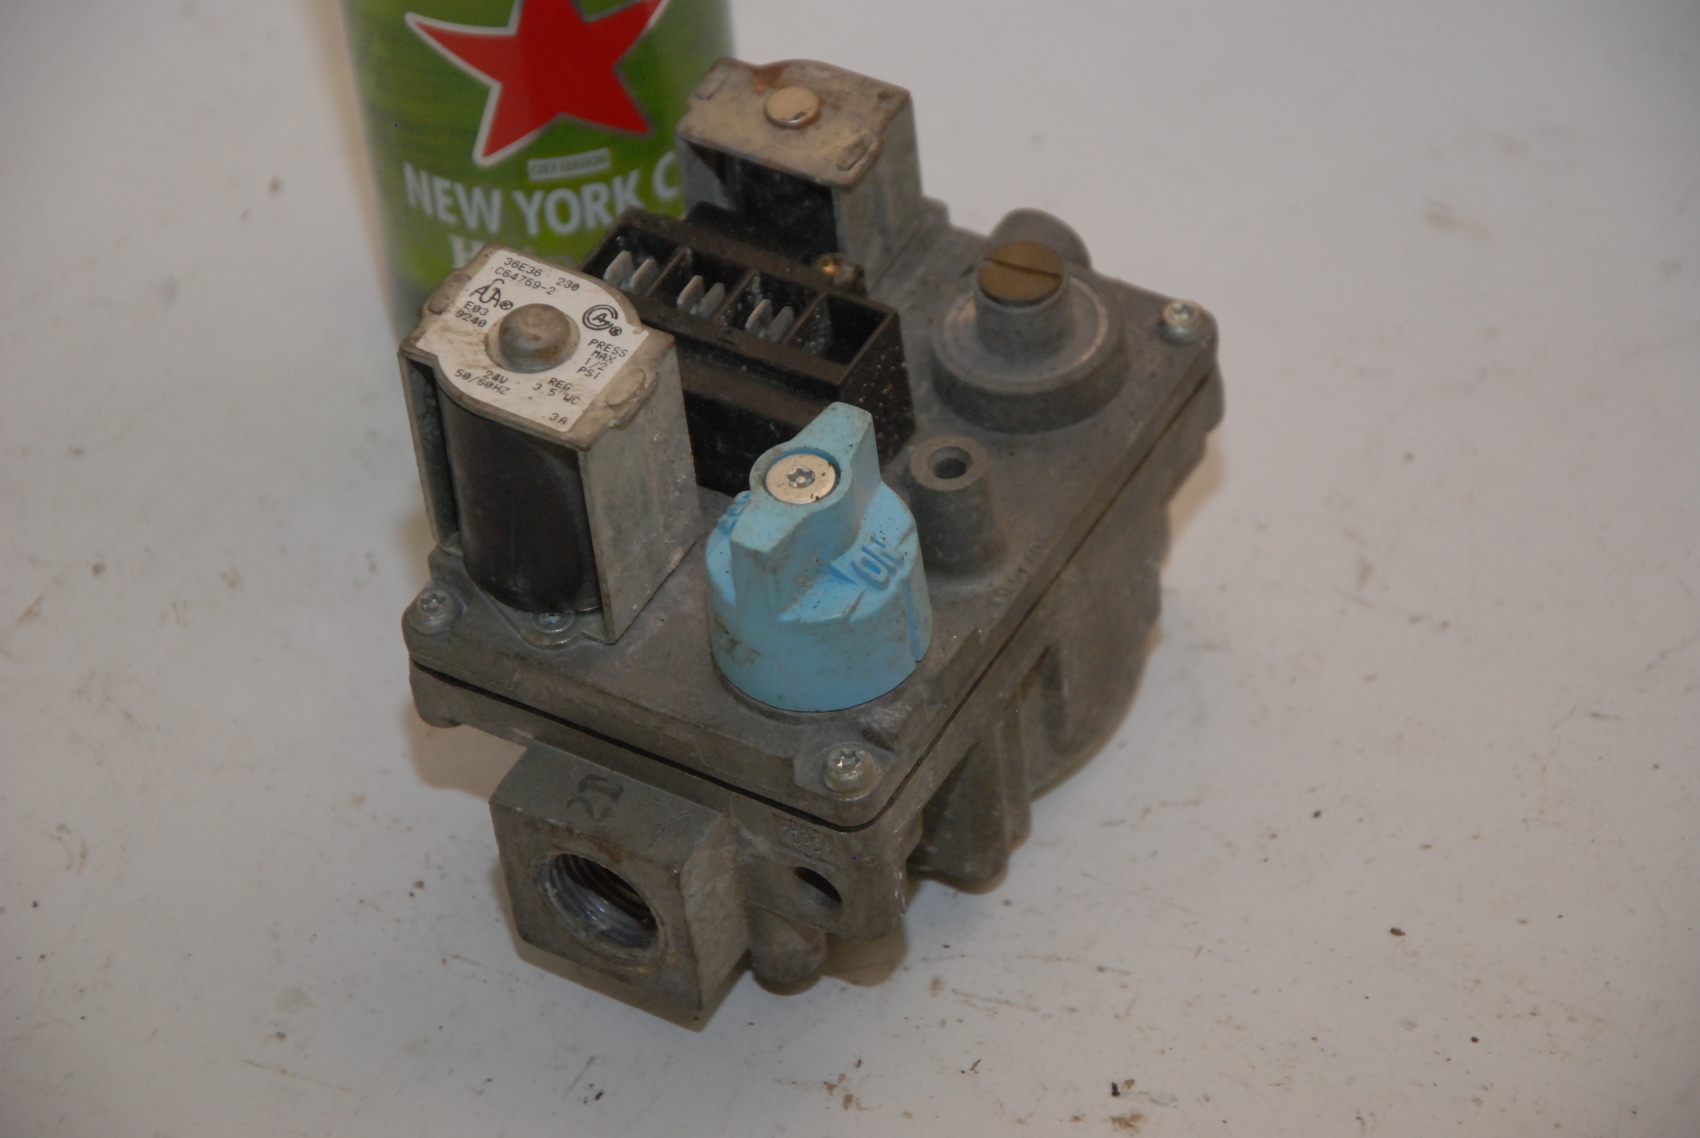 Generic Natural Gas Valve;36E54 230;From Amana GUC090C35C Furnace